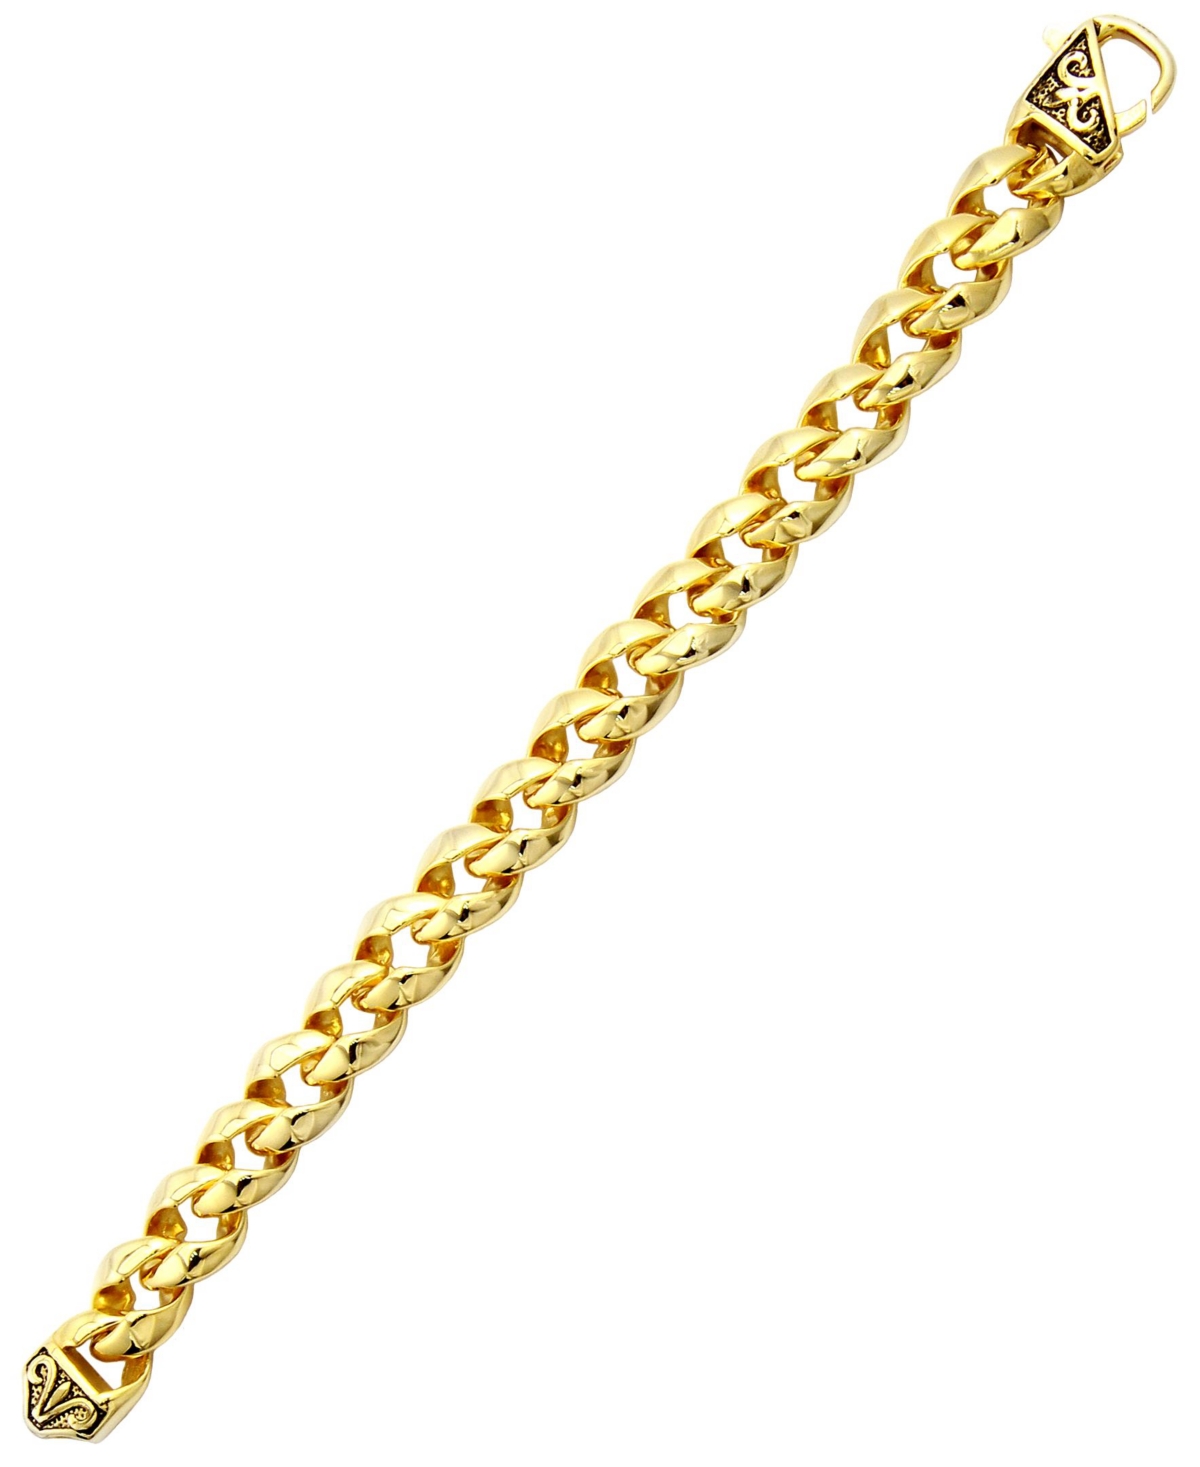 Sutton Stainless Steel Curb Link Chain Bracelet with Filigree Clasp - Gold